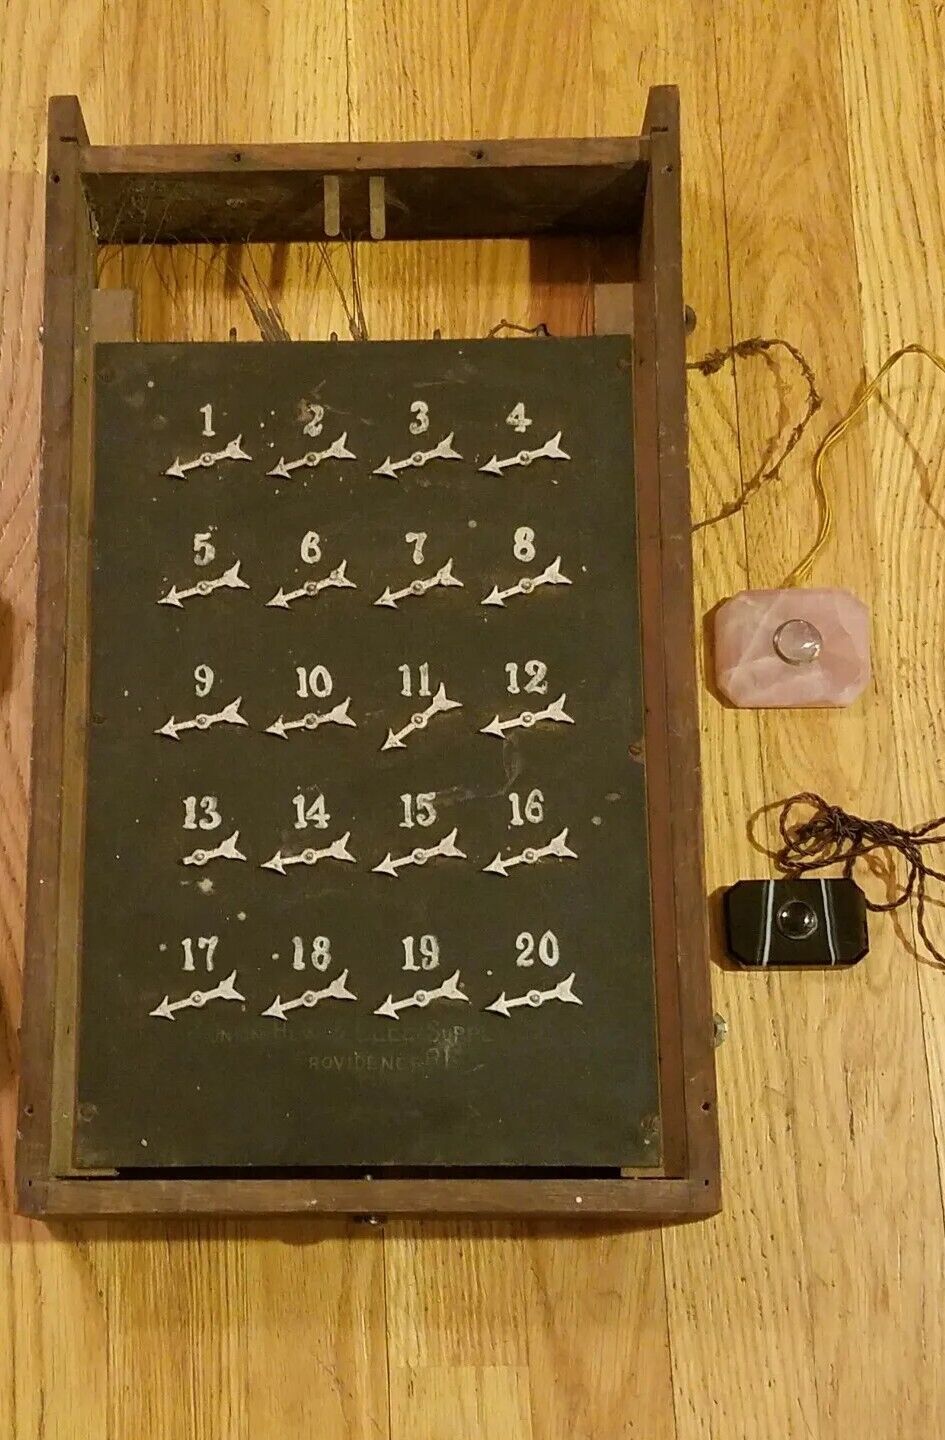 annunciator panel Antique with call Bells, Providence Rhode Island 1894